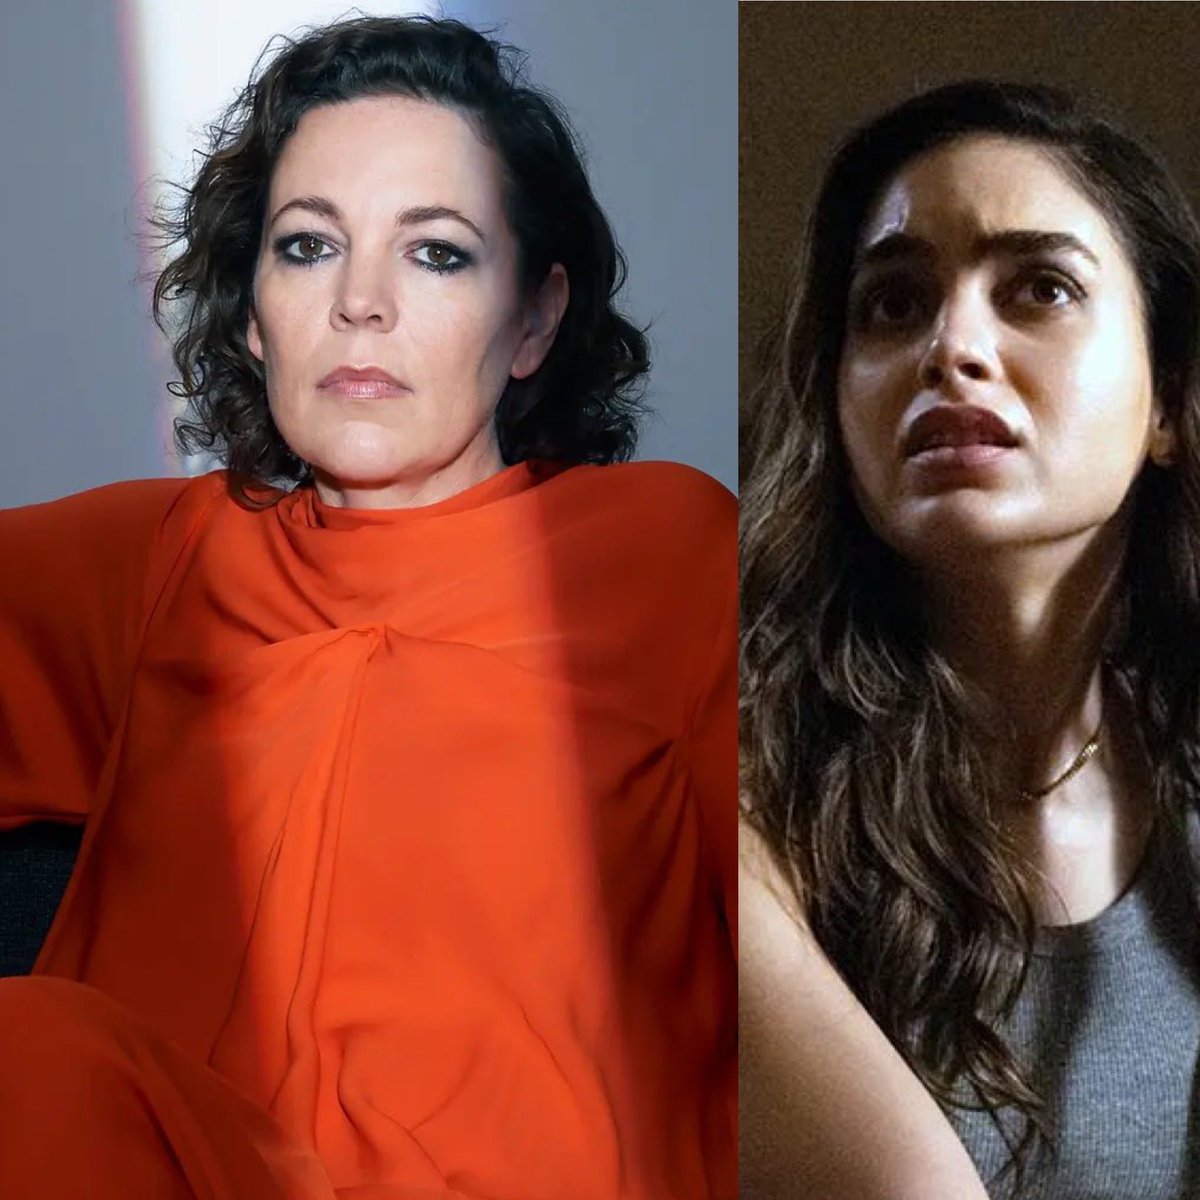 More than 1,300 #actors and #artists have signed a letter condemning censorship against speaking out on #Palestine, citing the recent firing of ‘#Scream’ star #MelissaBarrera. 

Among them, #OliviaColman, #AimeeLouWood, #EmmaSeligman and #HarrietWalter.